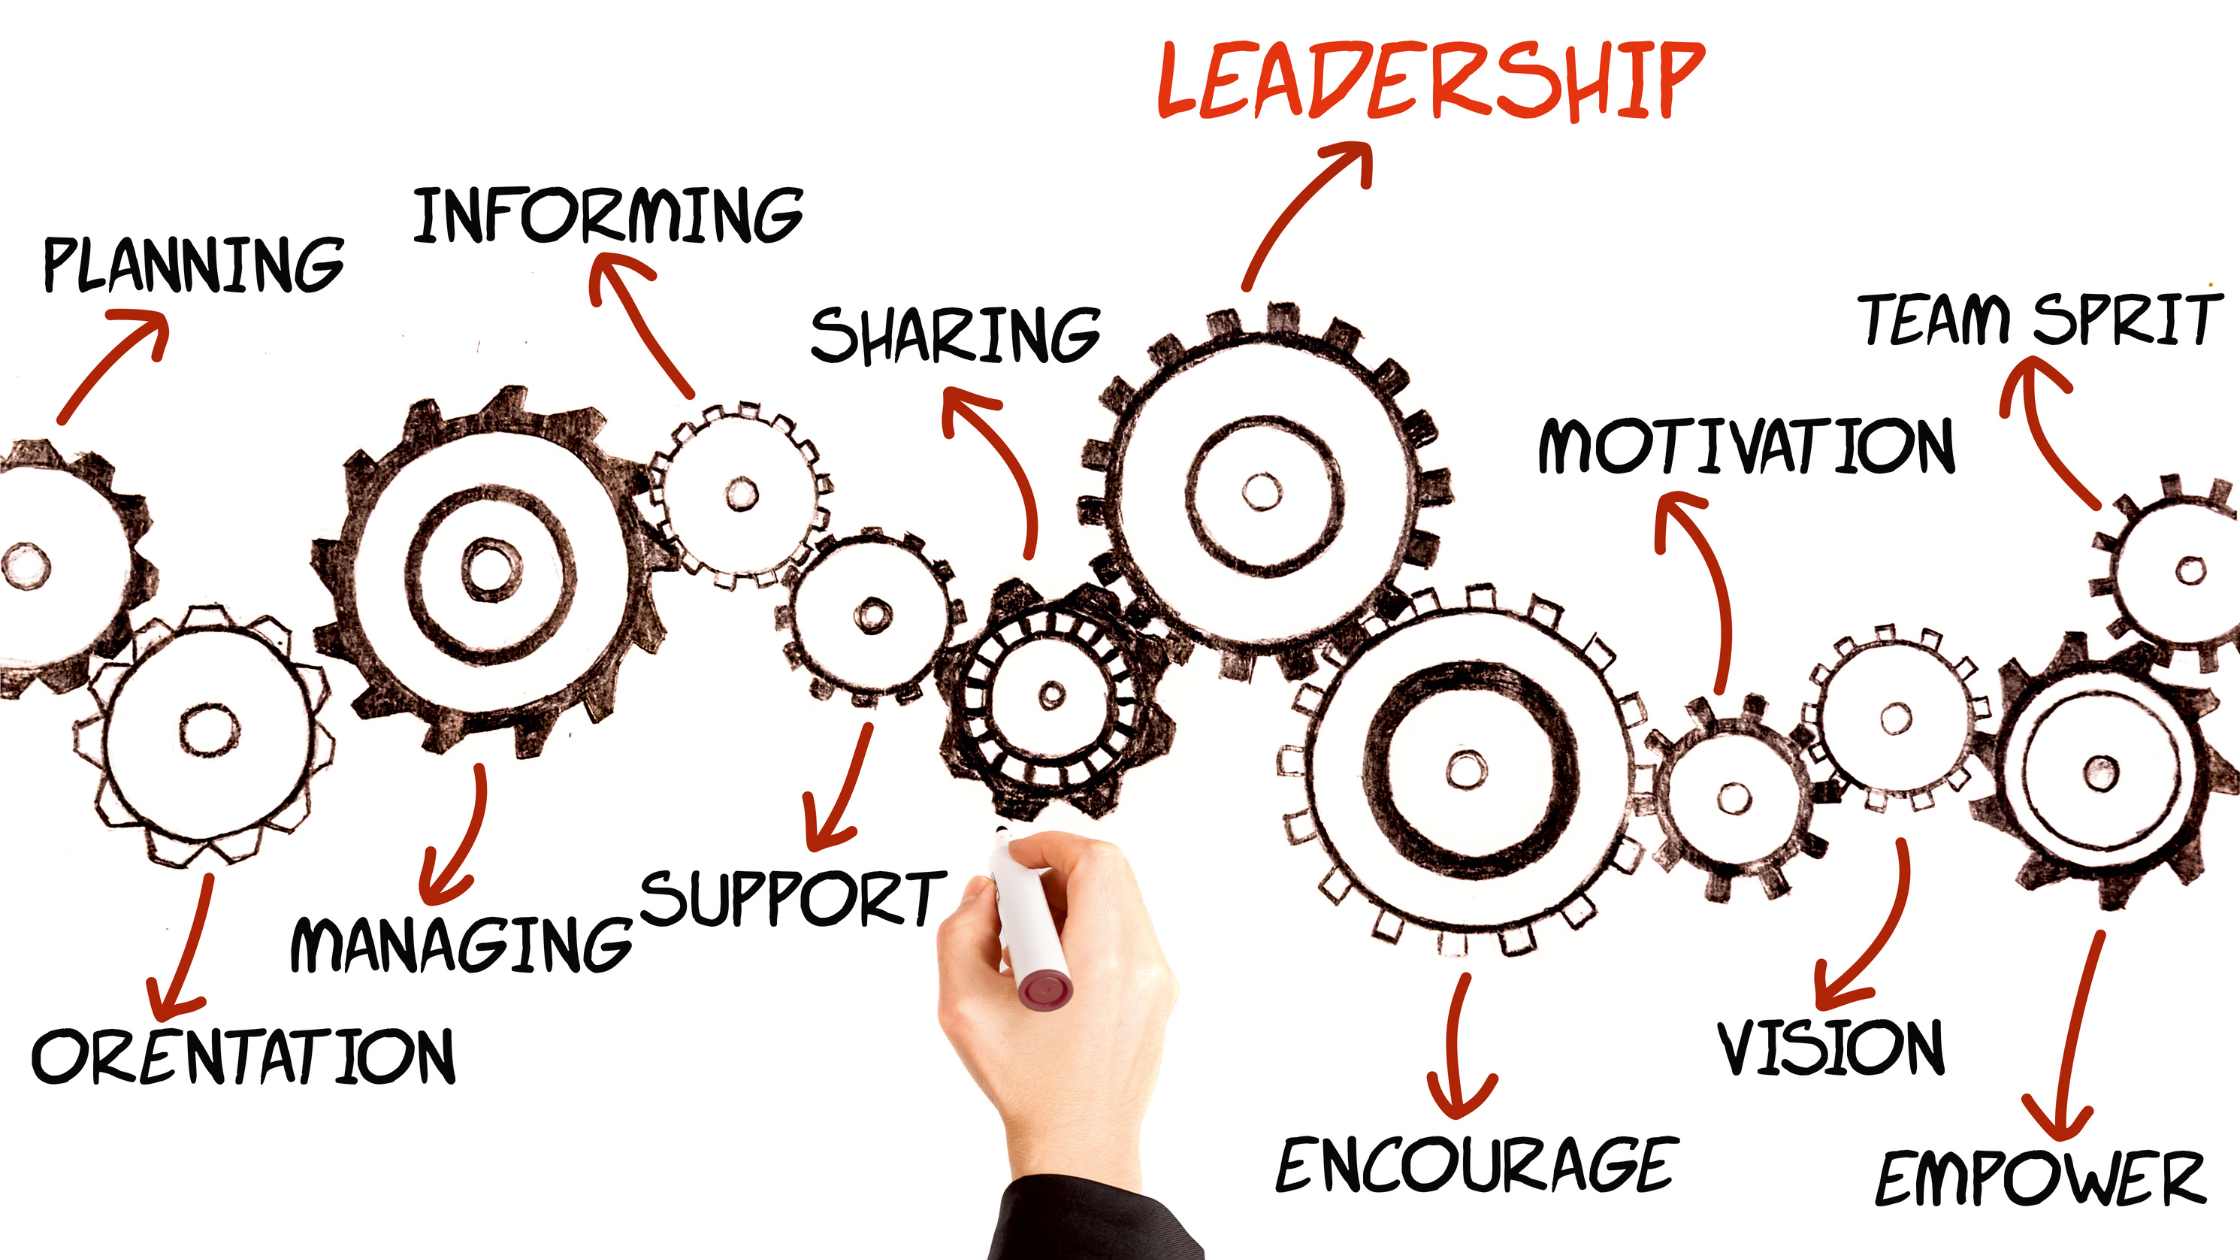 Leadership & Growth: The Key Characteristics of Leadership In A Growing Company